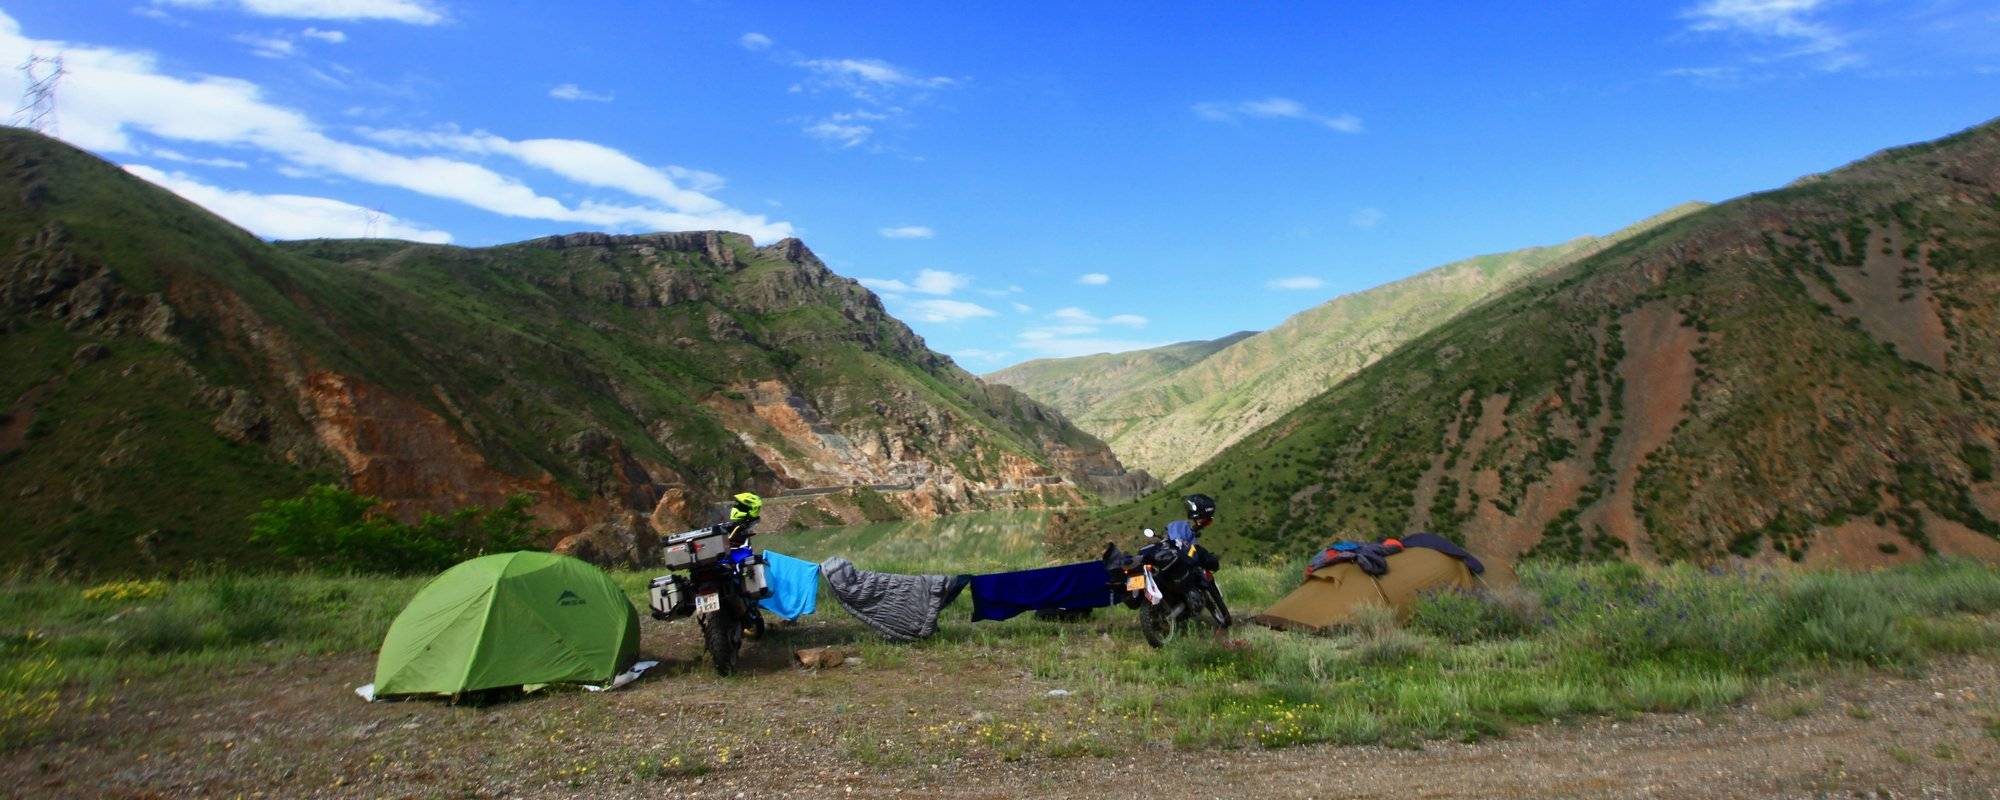 Camping adventure in the Turkish mountains on the way to Tbilisi, the capital of Georgia [Eng/Ger]